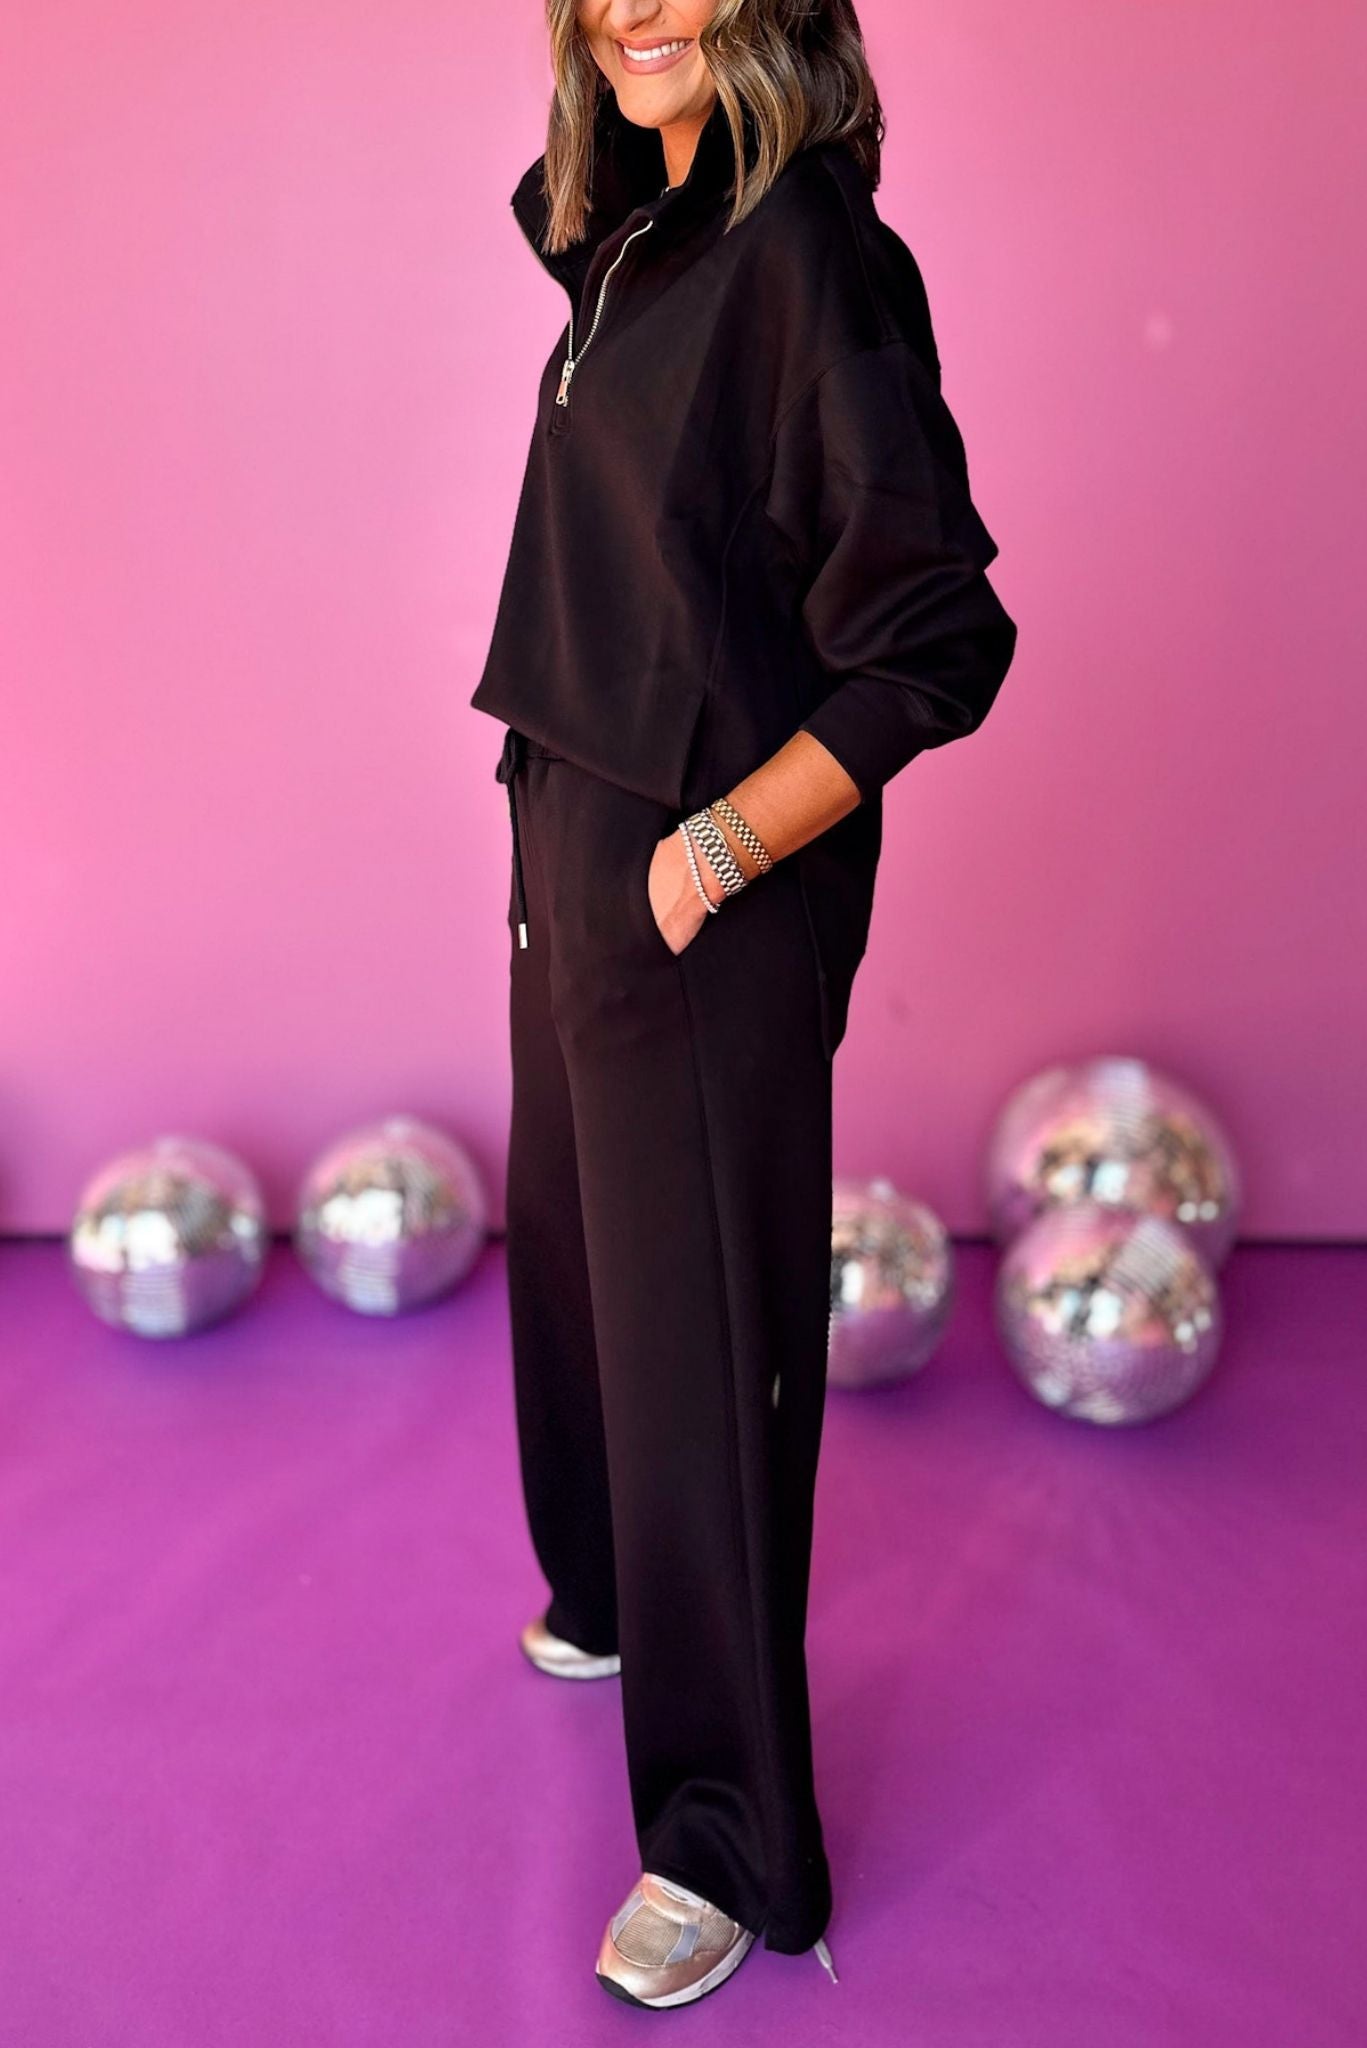 SSYS Black Air Wide Leg Pants, must have pants, must have style, must have comfortable style, fall fashion, fall style, street style, mom style, elevated comfortable, elevated loungewear, elevated style, shop style your senses by mallory fitzsimmons